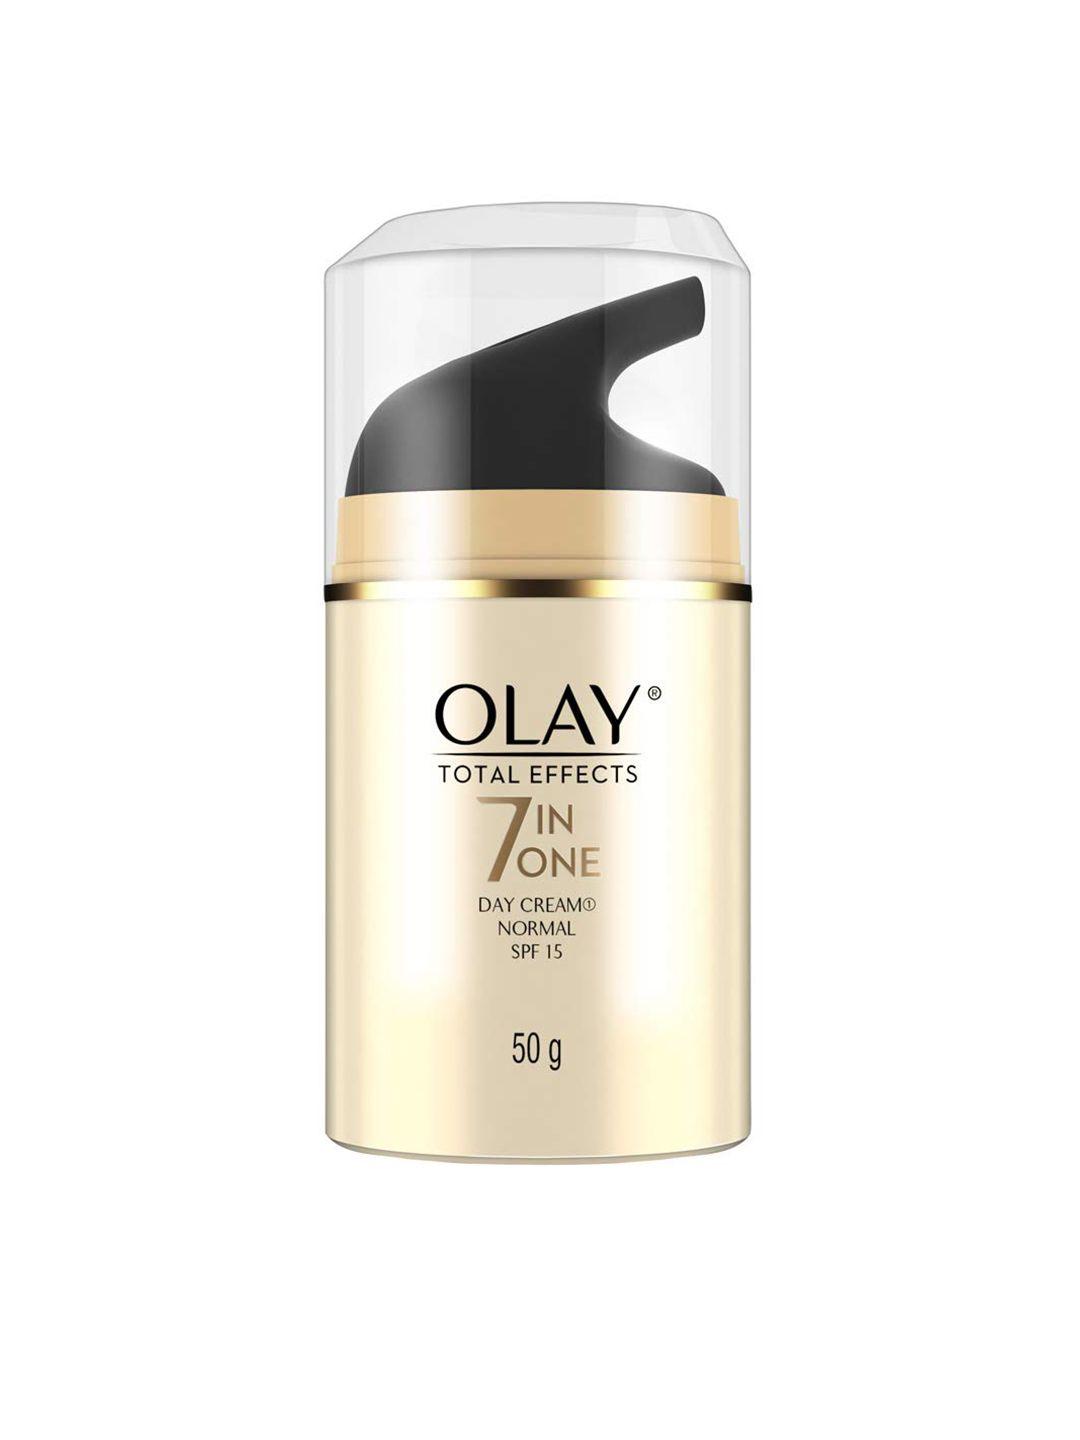 olay-total-effects-7-in-one-anti-ageing-day-cream-spf-15-50g